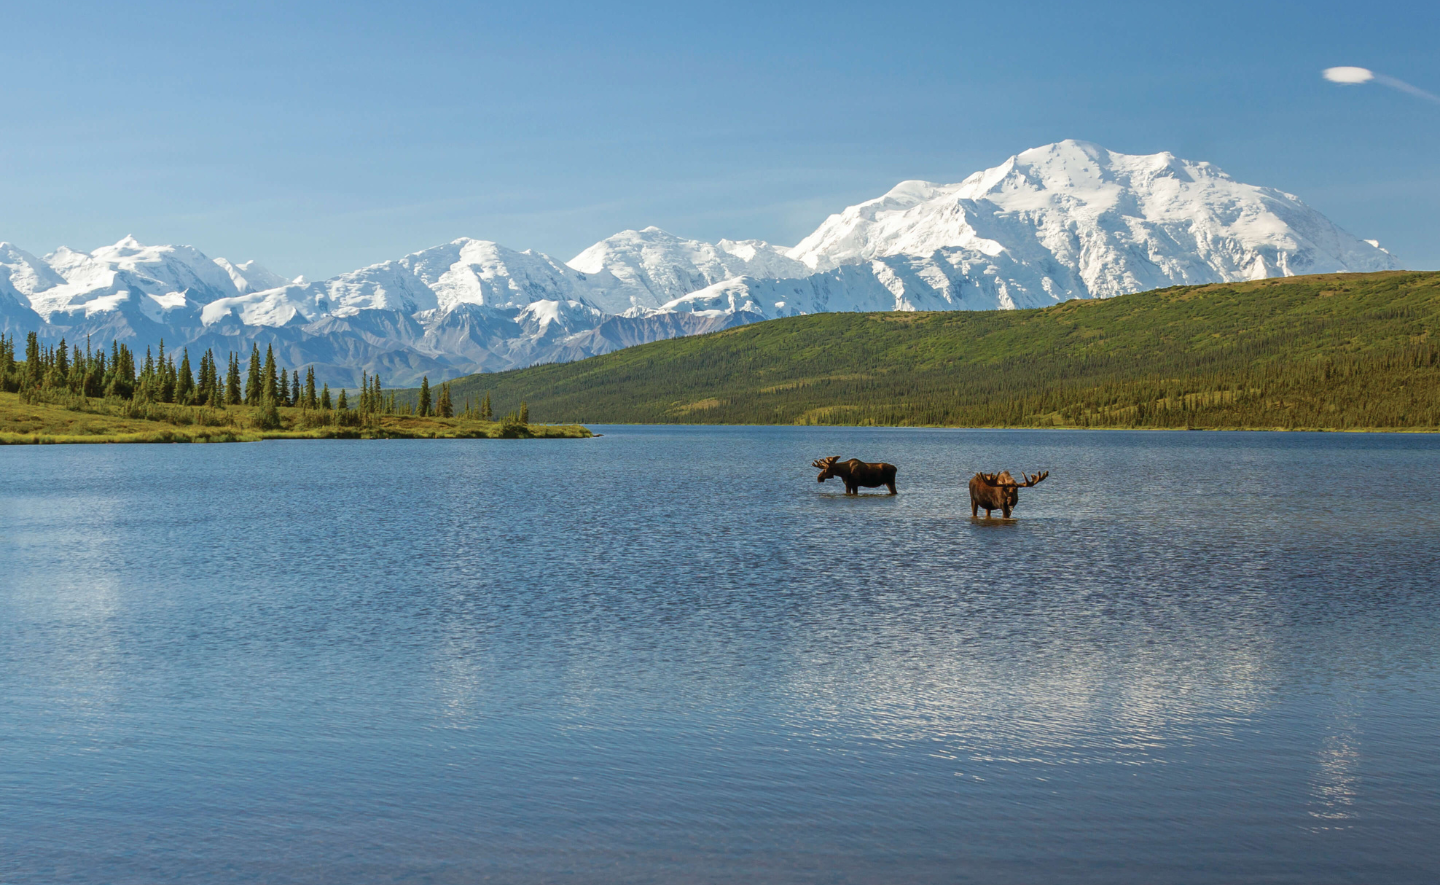 Two moose in a lake with snow capped mountains in the background.